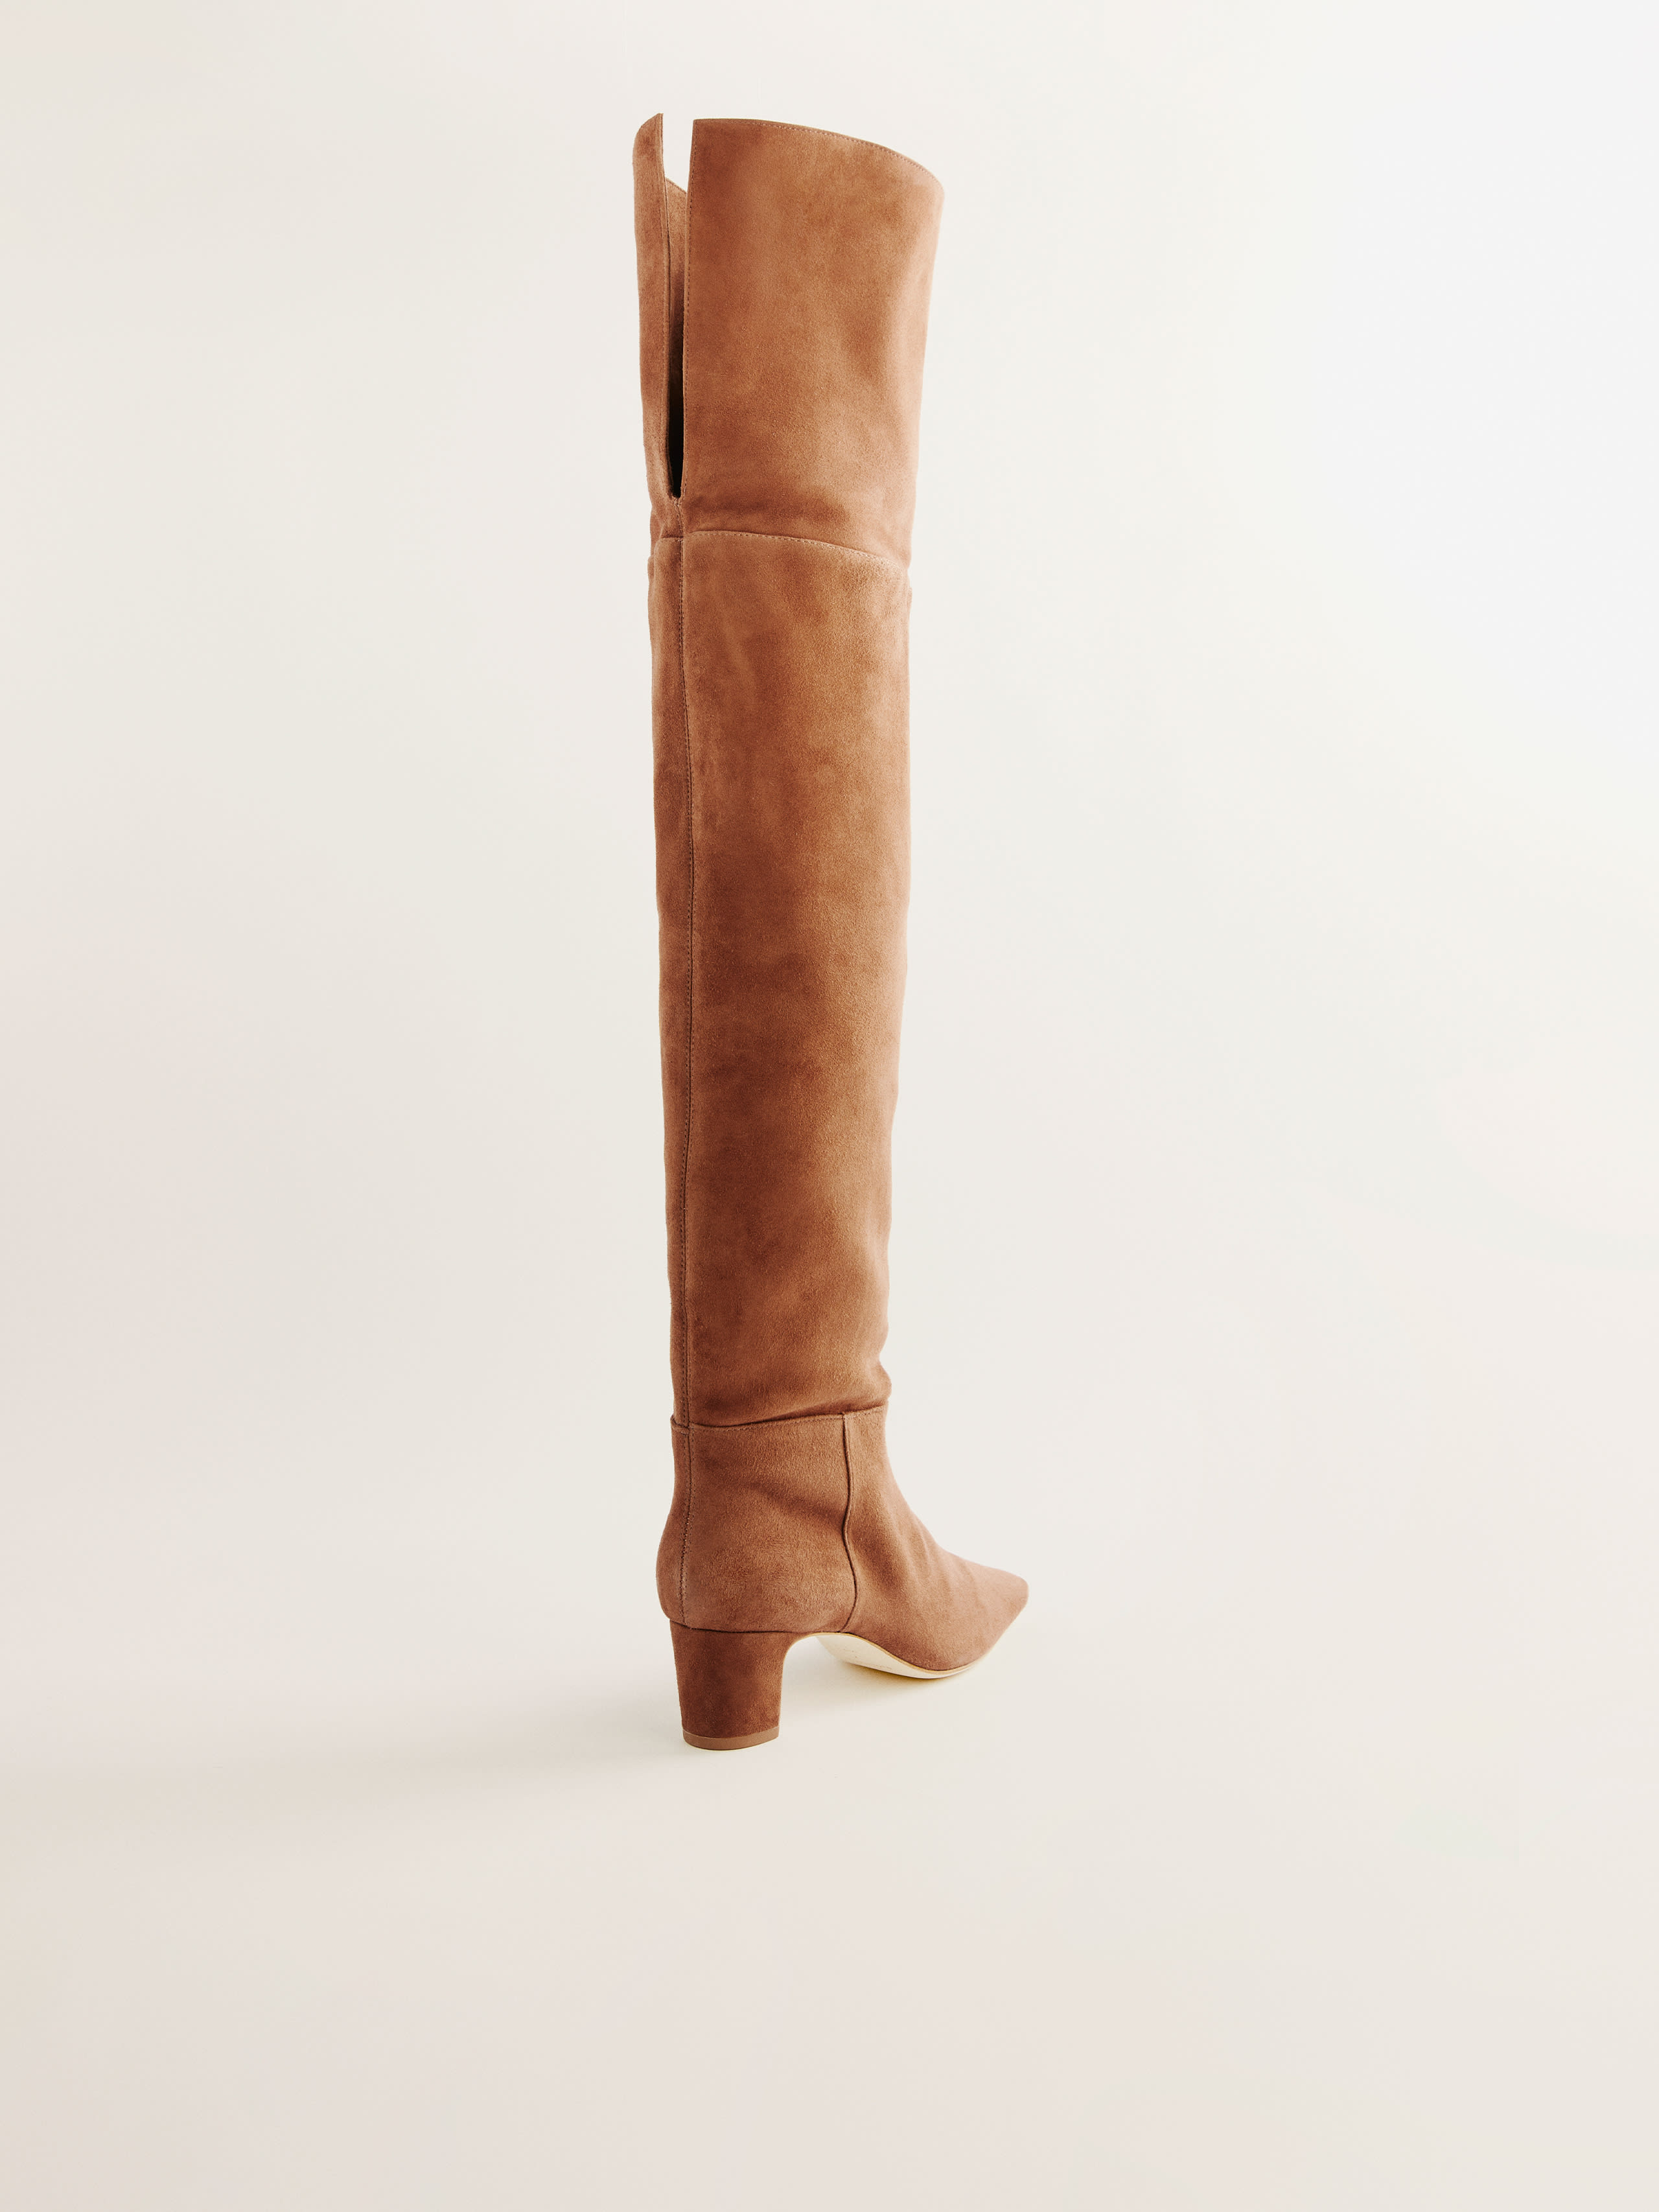 Reiss Over The Knee Boot, thumbnail image 5